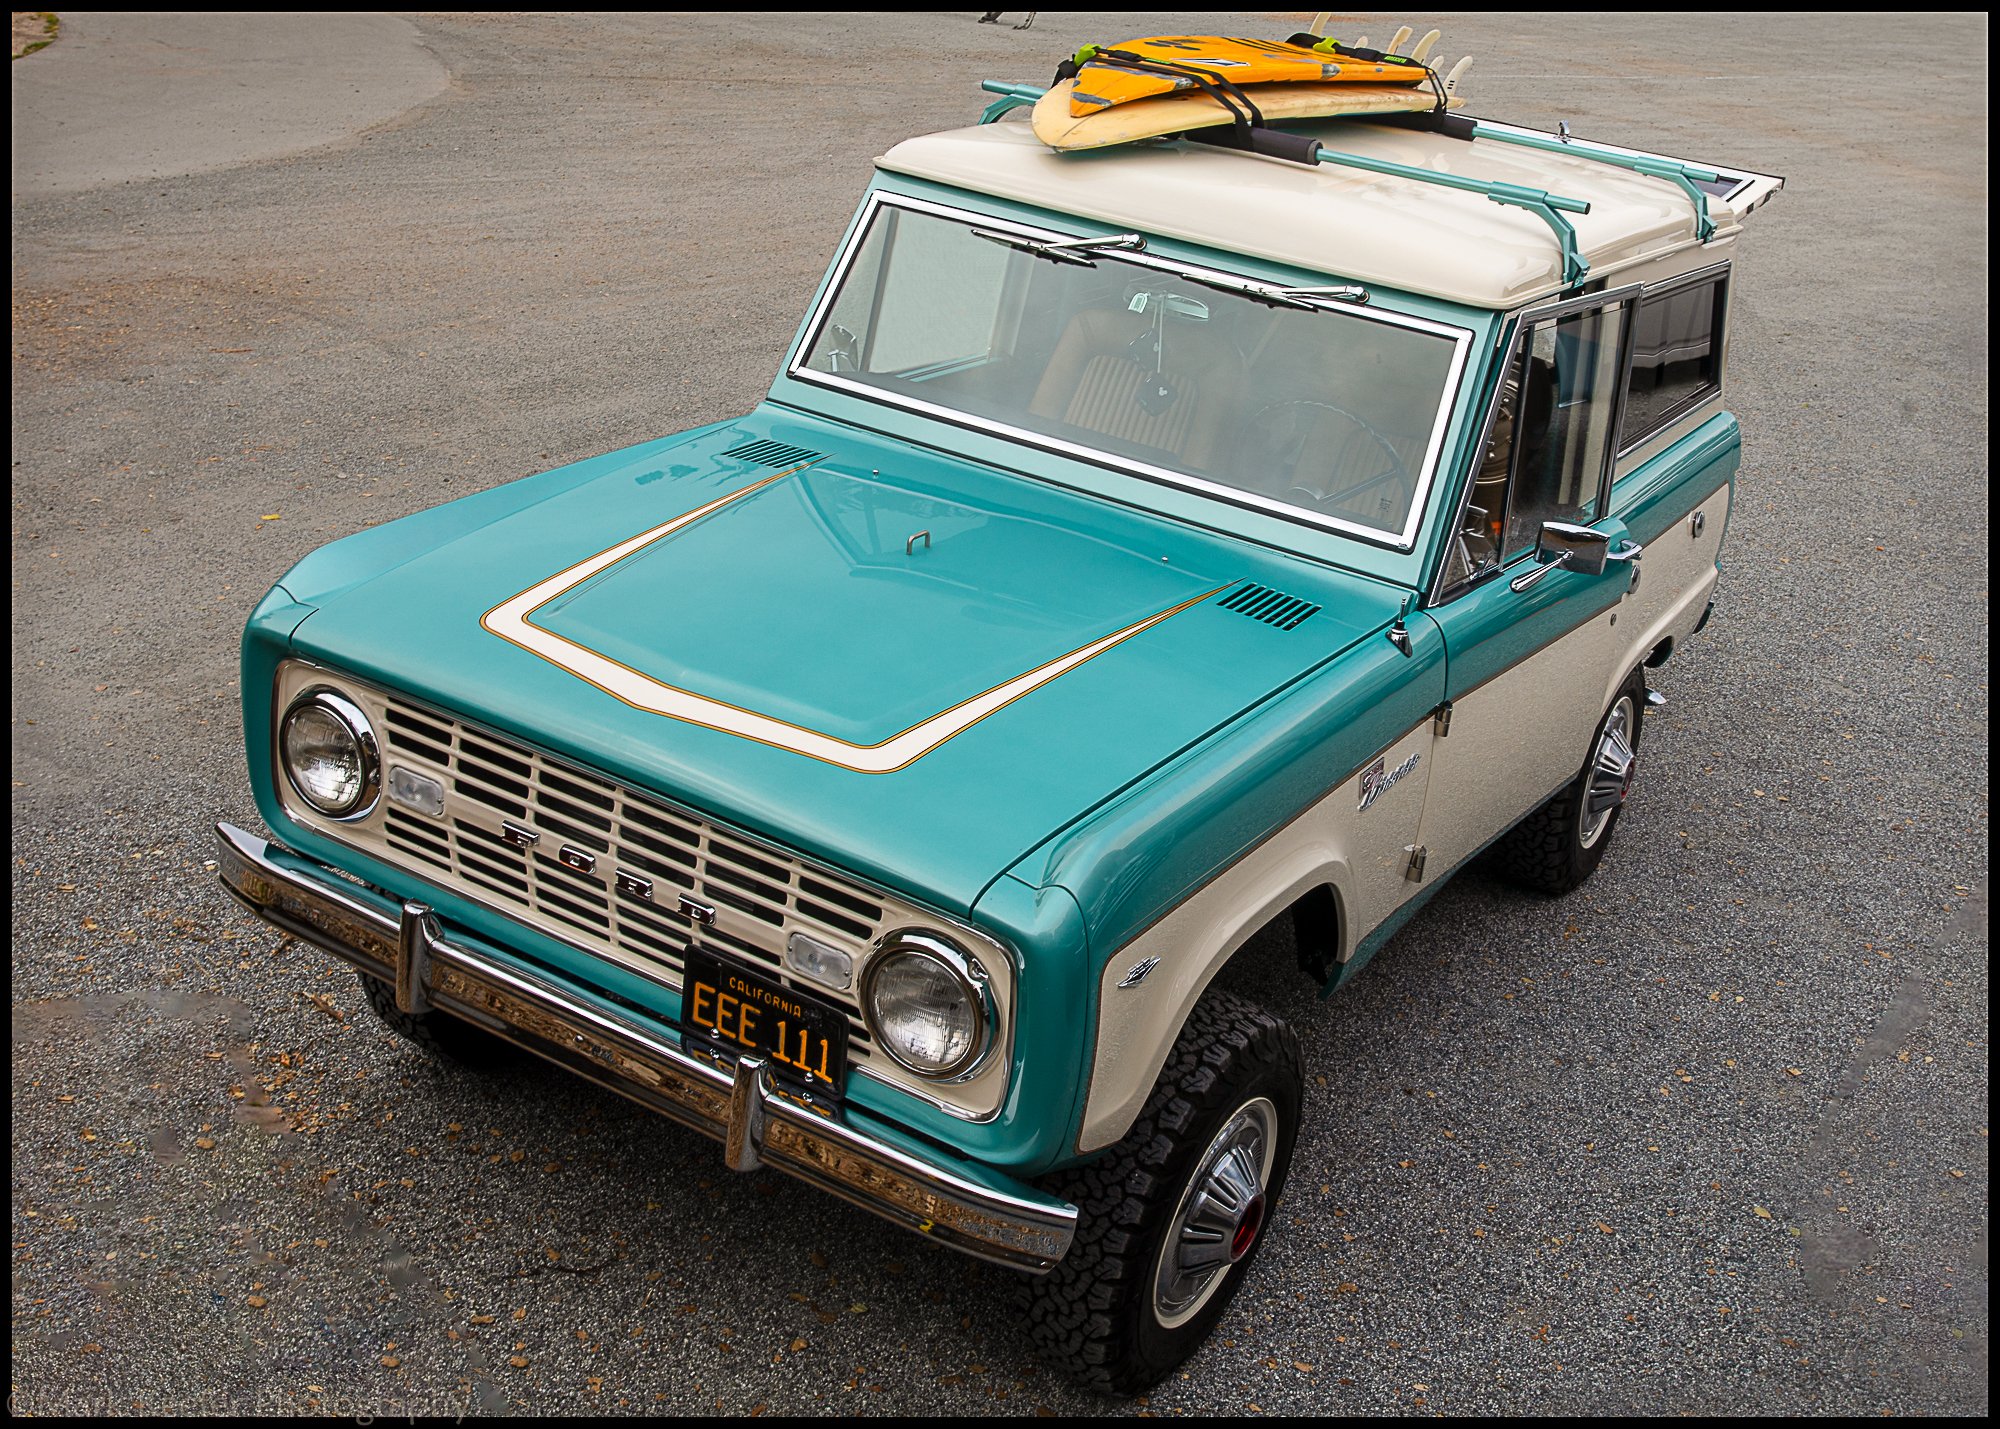 Ford Bronco heading to Surf City